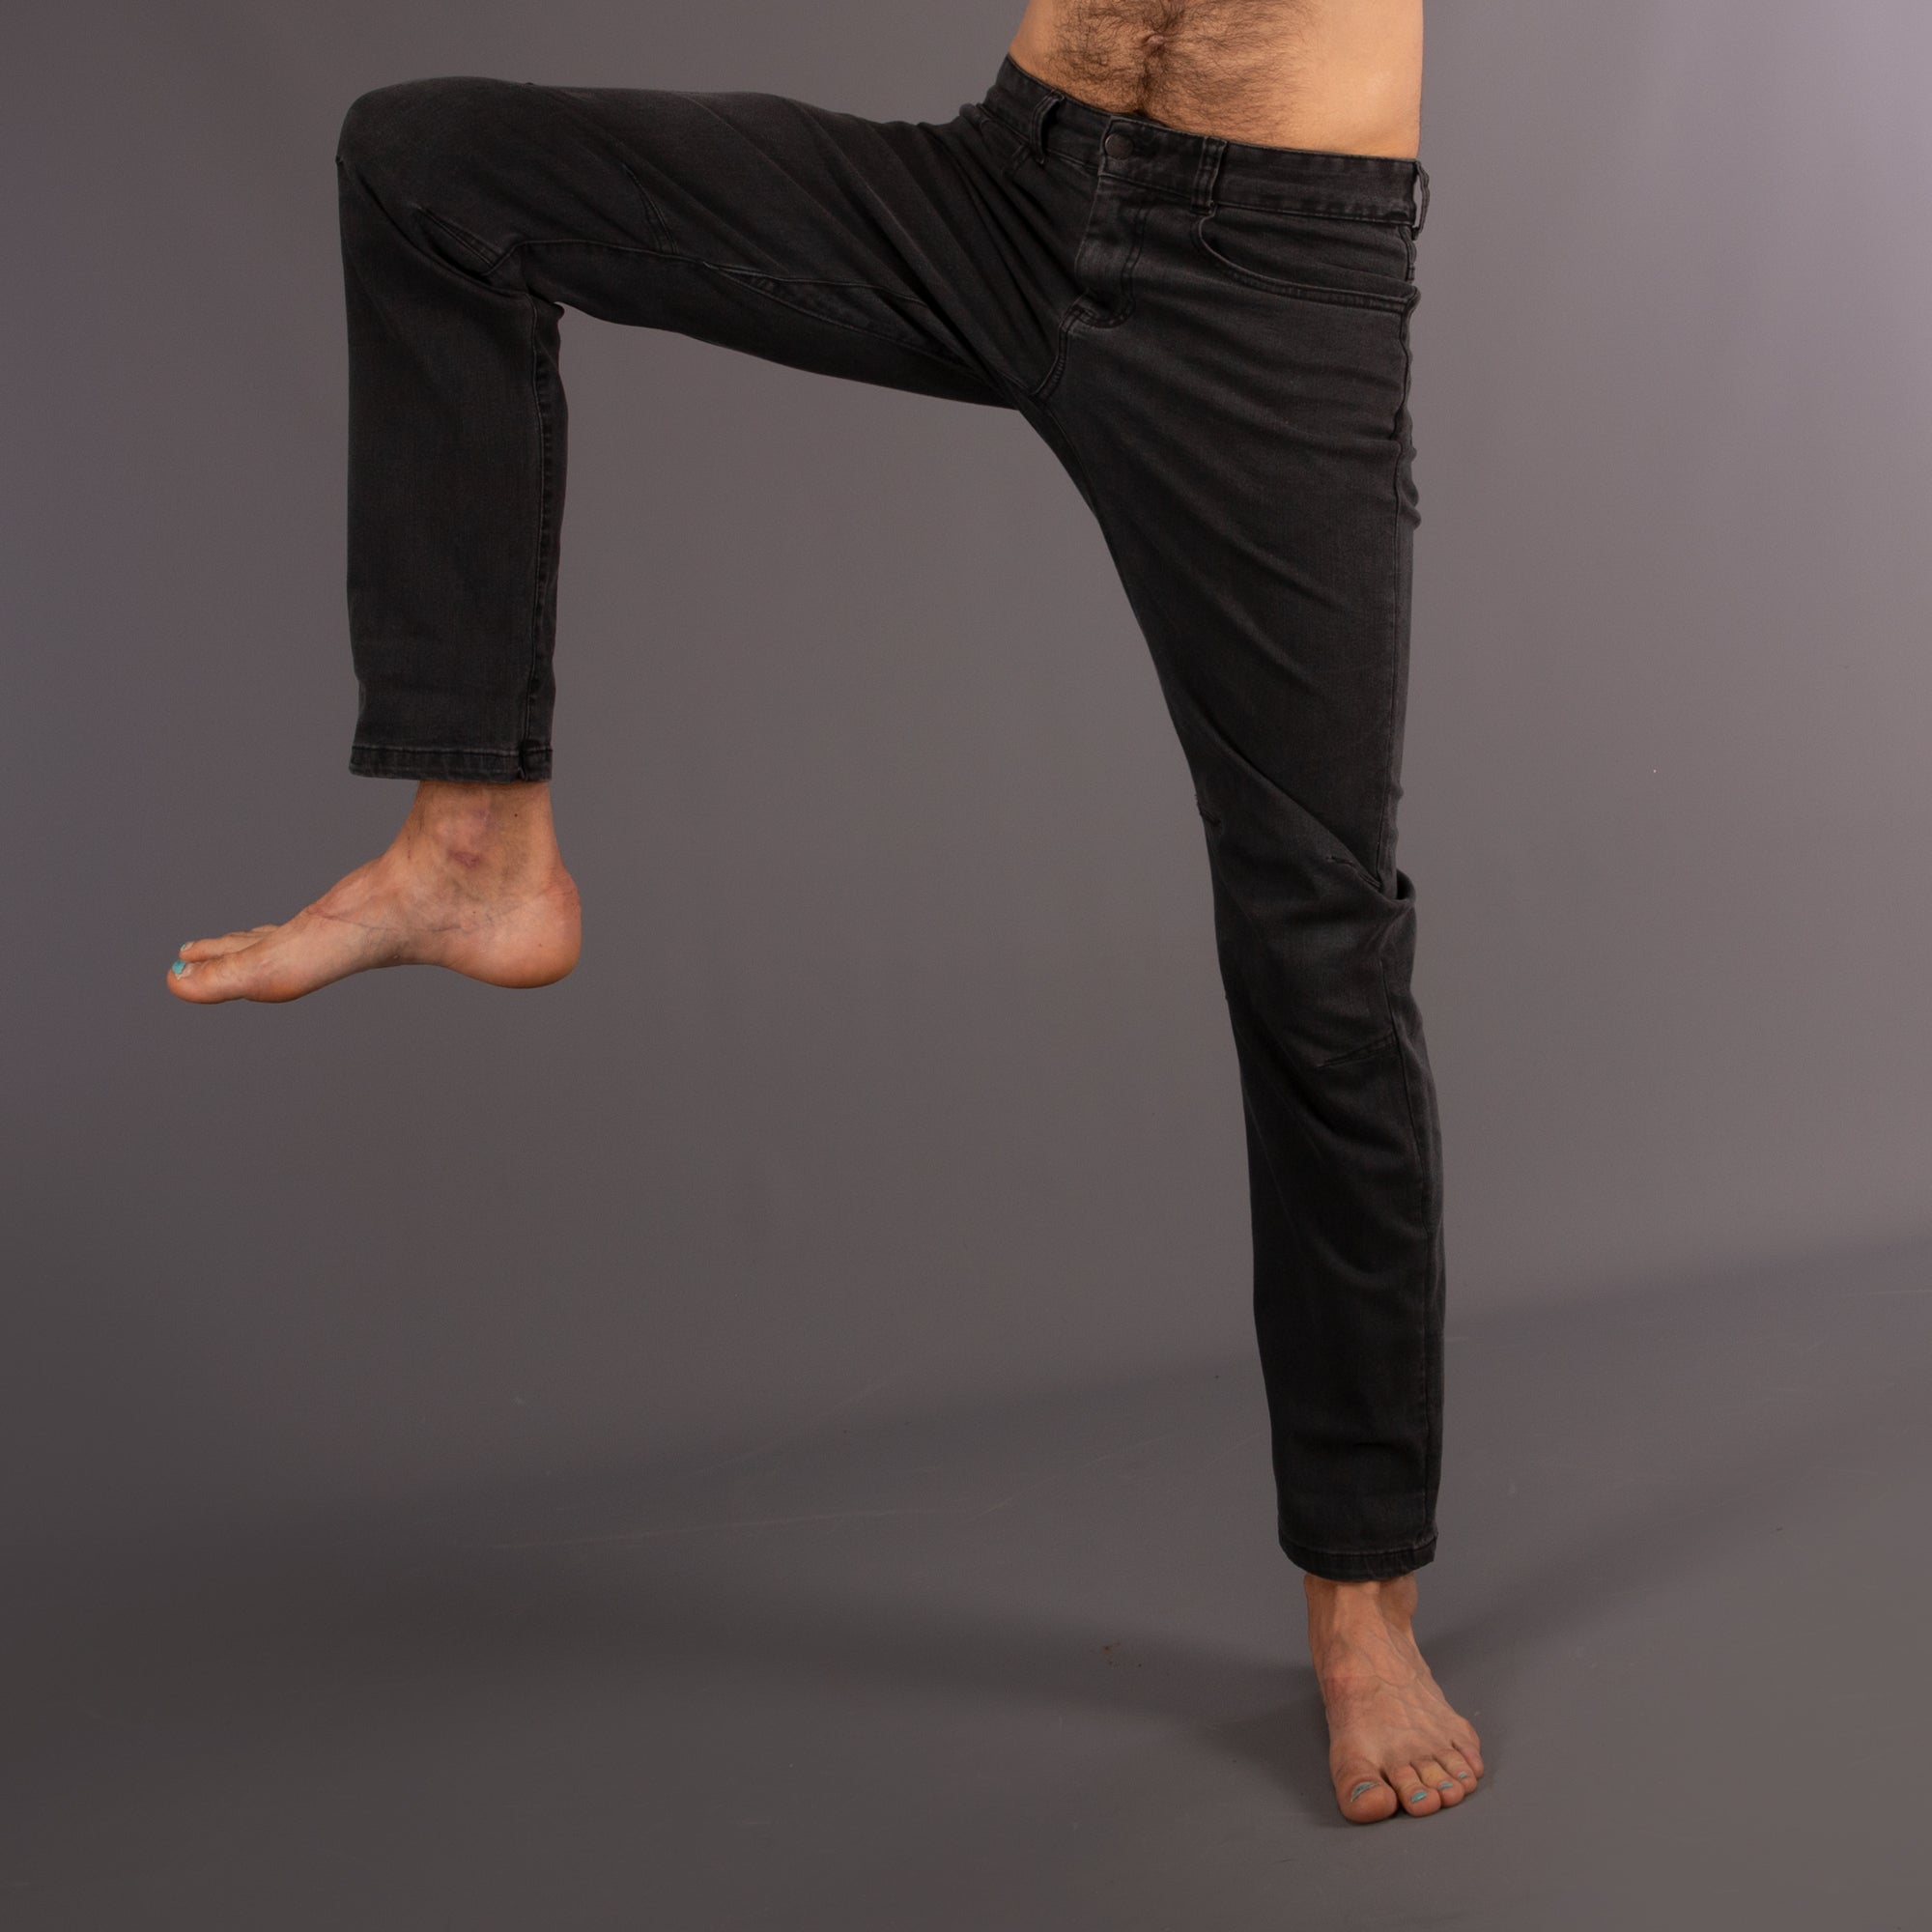 MERCURY Jeans | Mid Black Stretchy Sustainable Jeans | 3RD ROCK Clothing -  James is 6ft 2" with a 32" waist and 34" inseam, and wears a size 32/LL. M